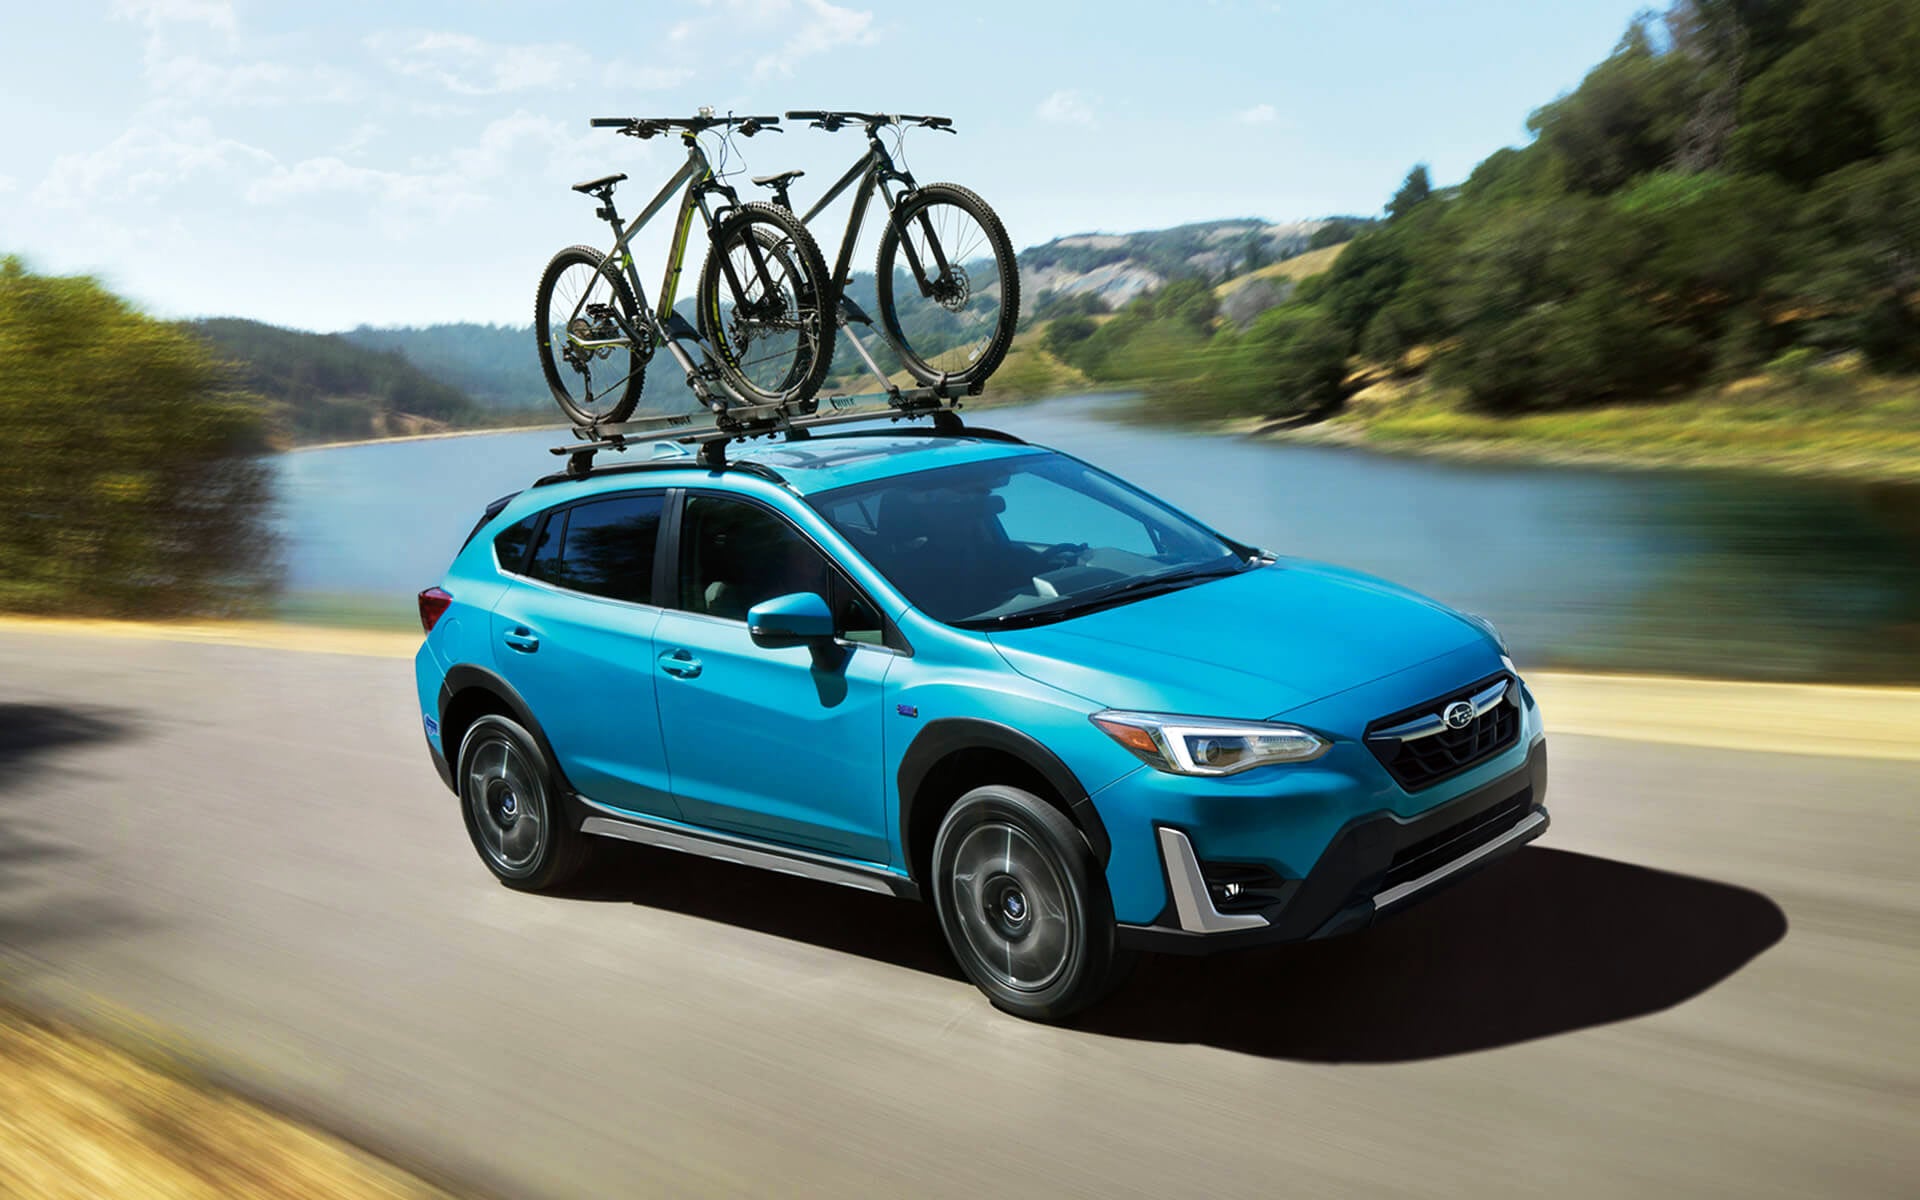 A blue Crosstrek Hybrid with two bicycles on its roof rack driving beside a river | Valley Subaru of Longmont in Longmont CO